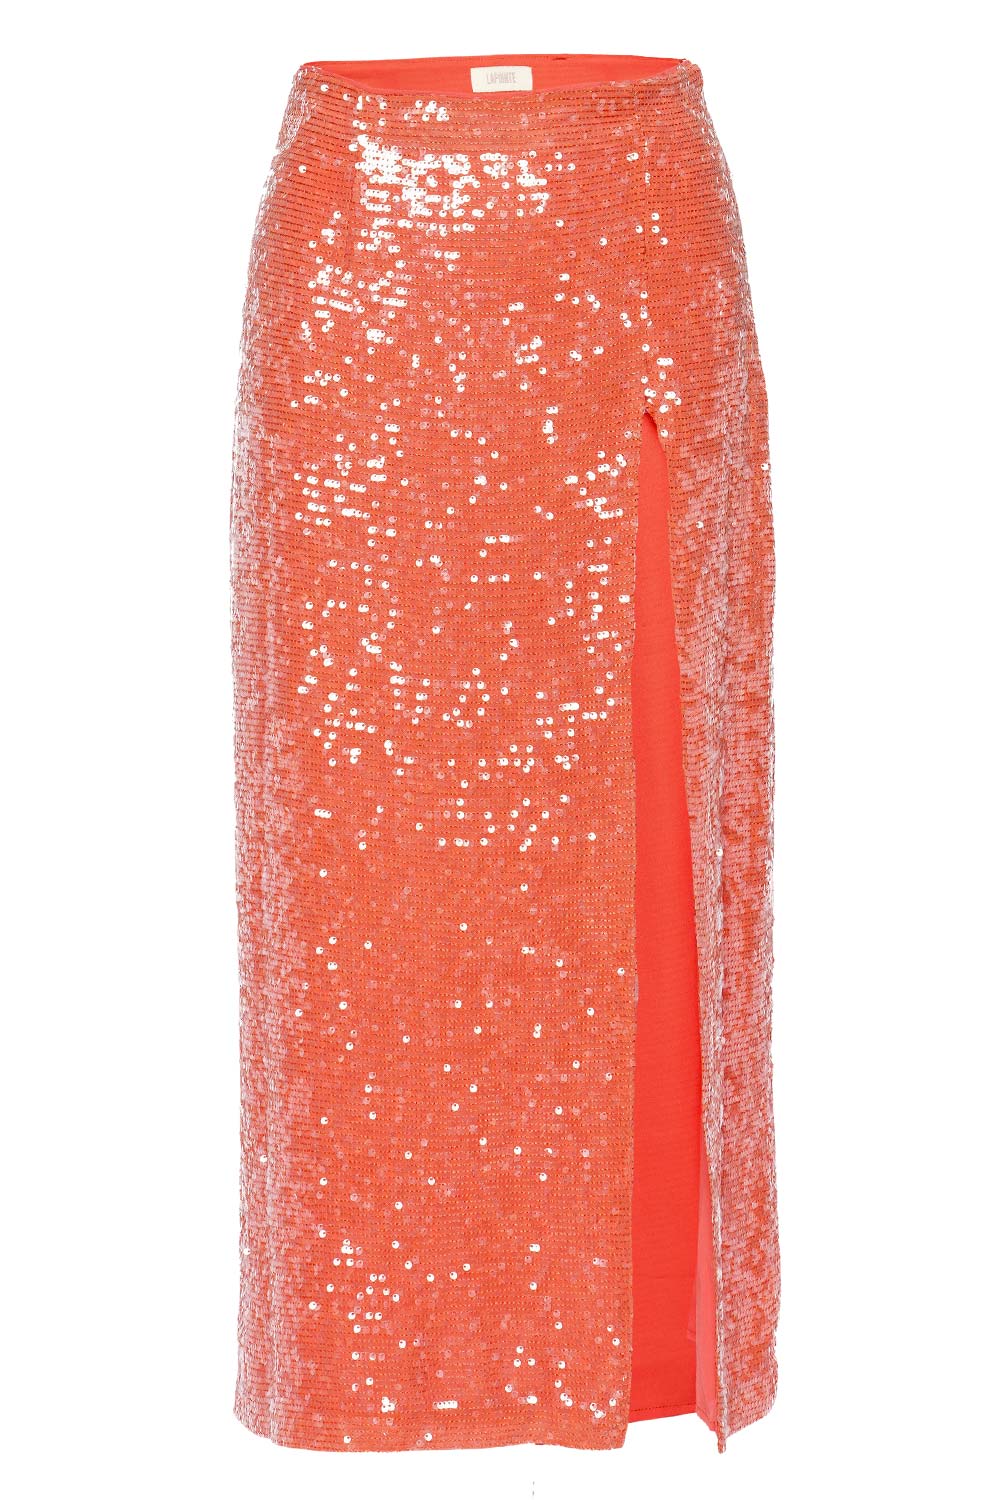 LAPOINTE Coral Sequin Embroidered Midi Skirt